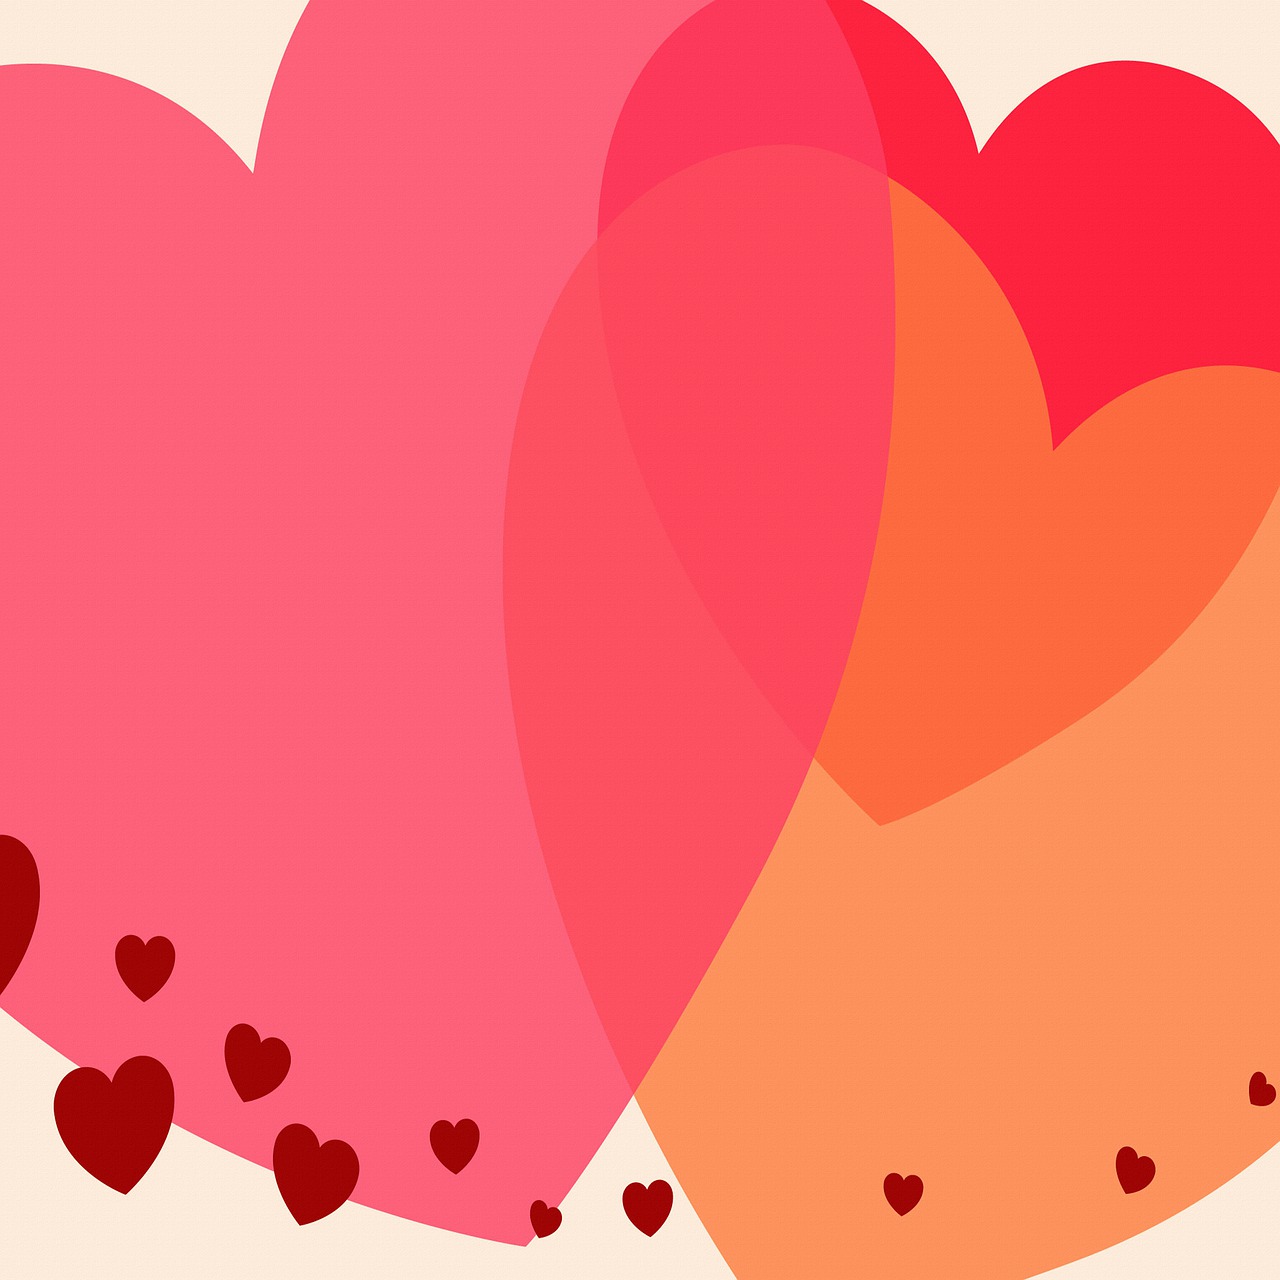 a couple of hearts that are next to each other, vector art, romanticism, 1128x191 resolution, banner, peach and goma style, background image